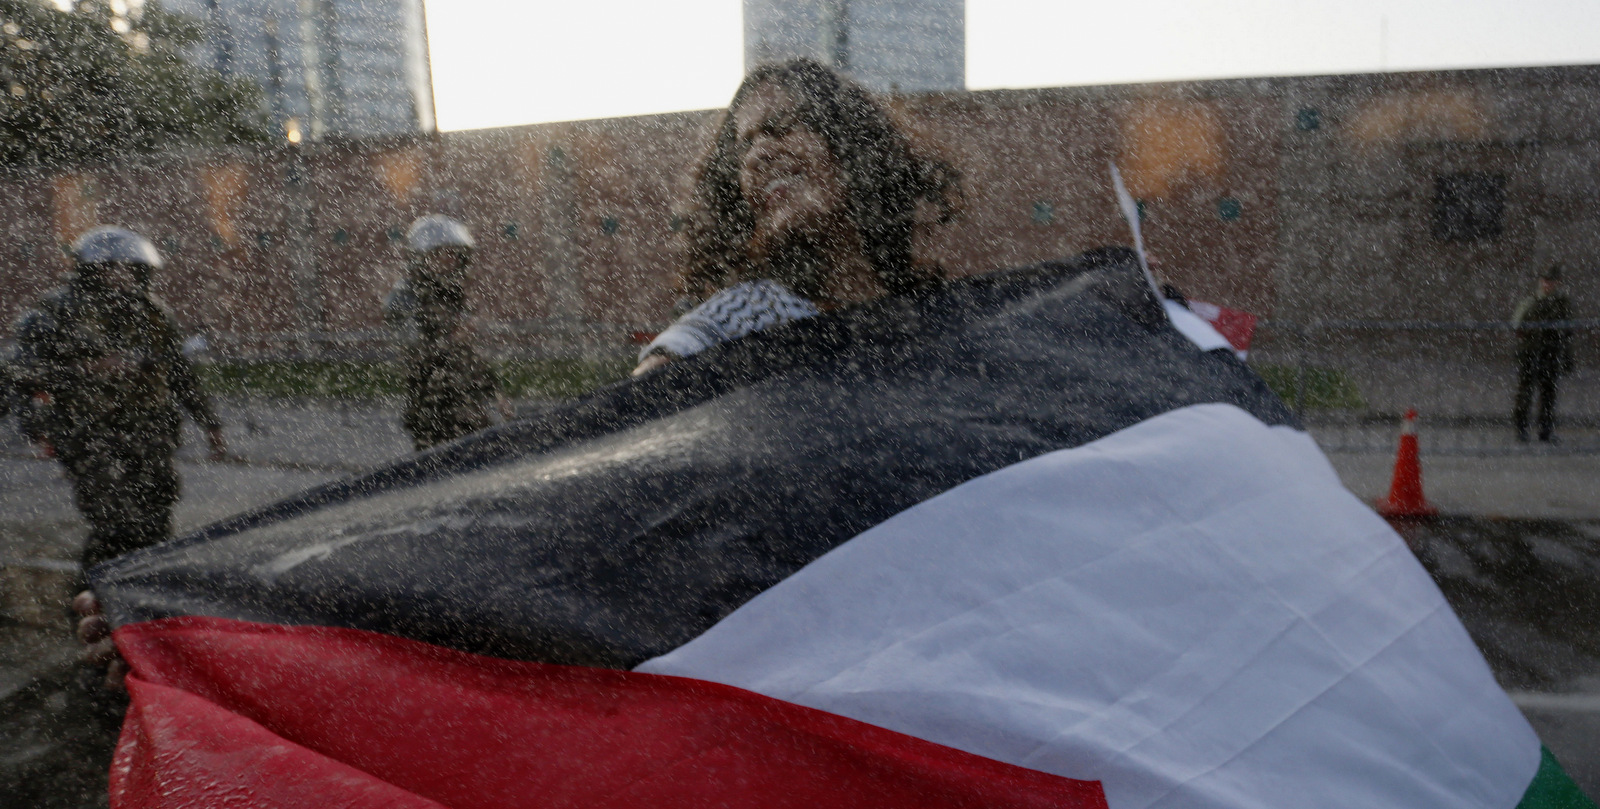 A woman protests U.S. President Donald Trump's decision to recognize Jerusalem as Israel's capital, outside the U.S. Embassy in Santiago, Chile, Dec. 11, 2017. The protest was organized by the Palestinian community in Chile. (AP/Luis Hidalgo)